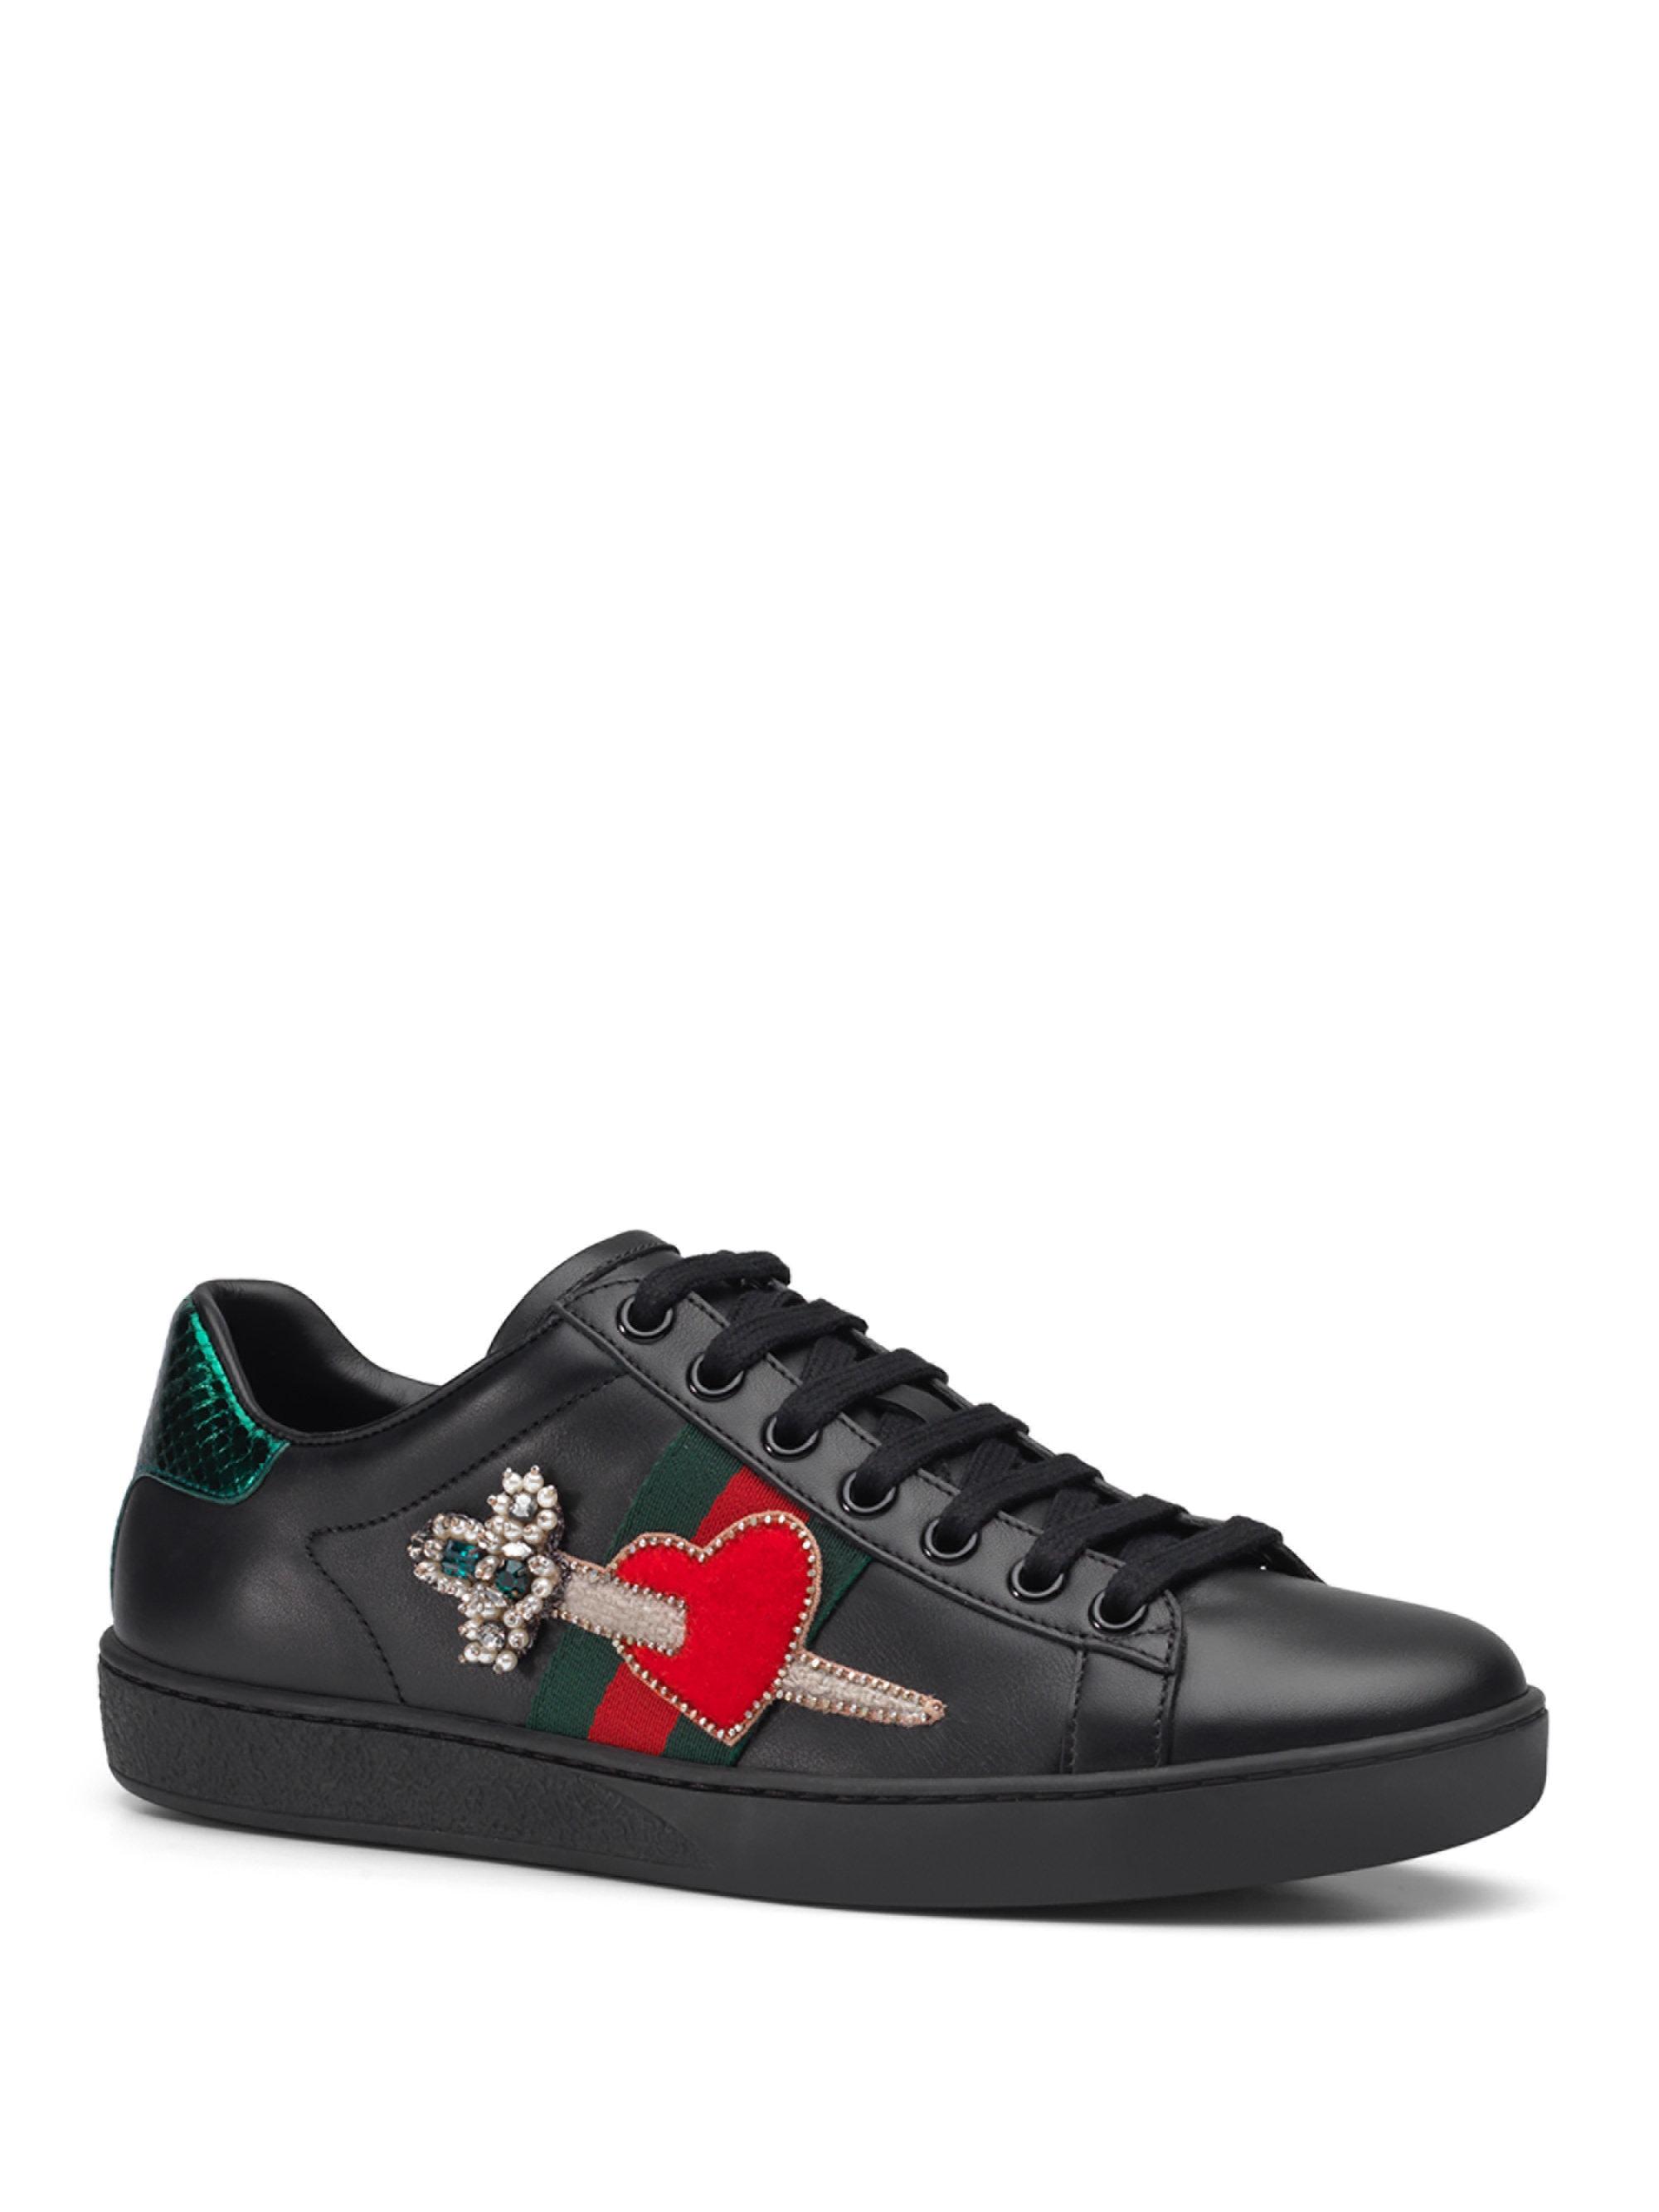 Gucci New Ace Pierced Heart Leather Sneakers in Black | Lyst